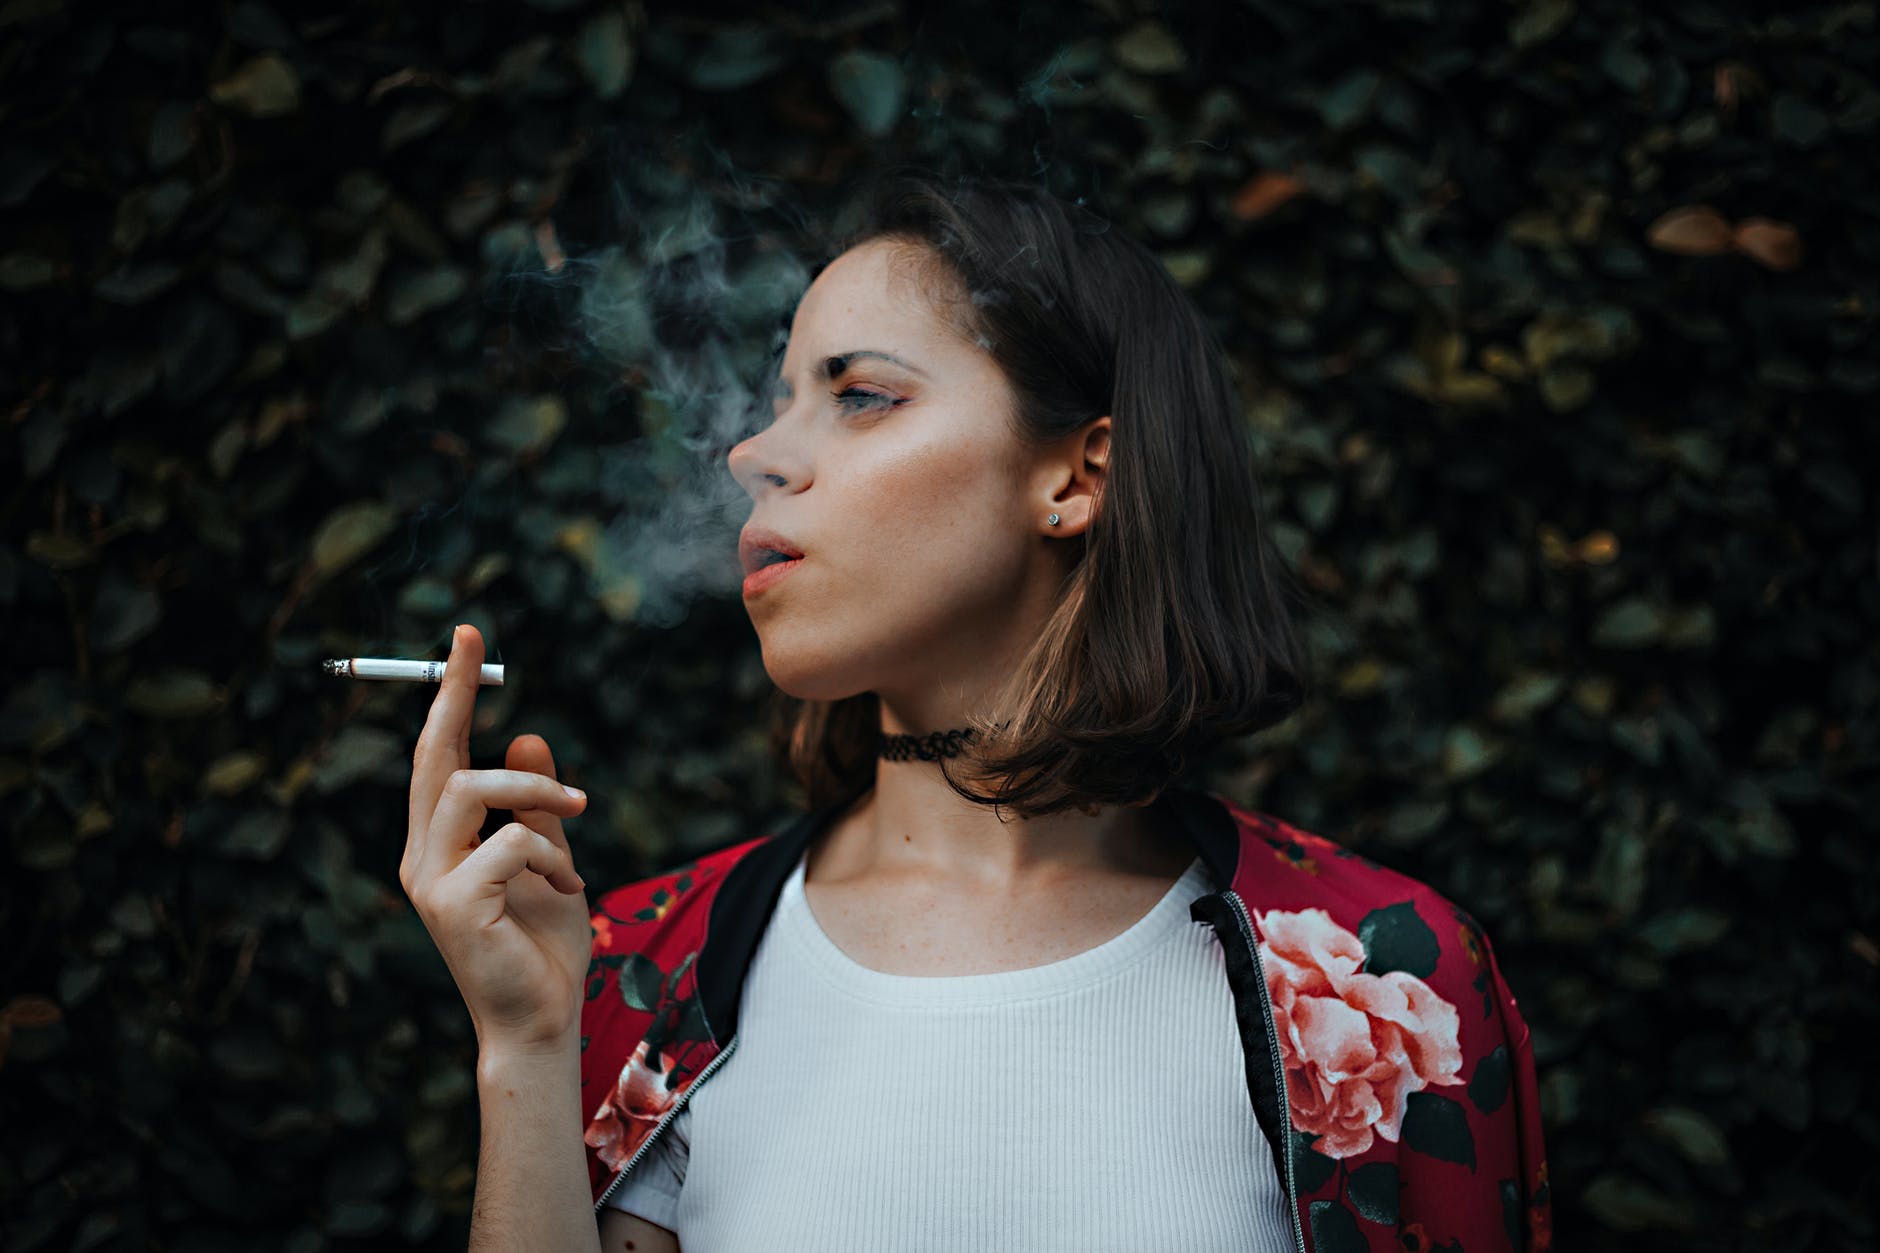 woman in white top and red floral jacket smoking cigarette